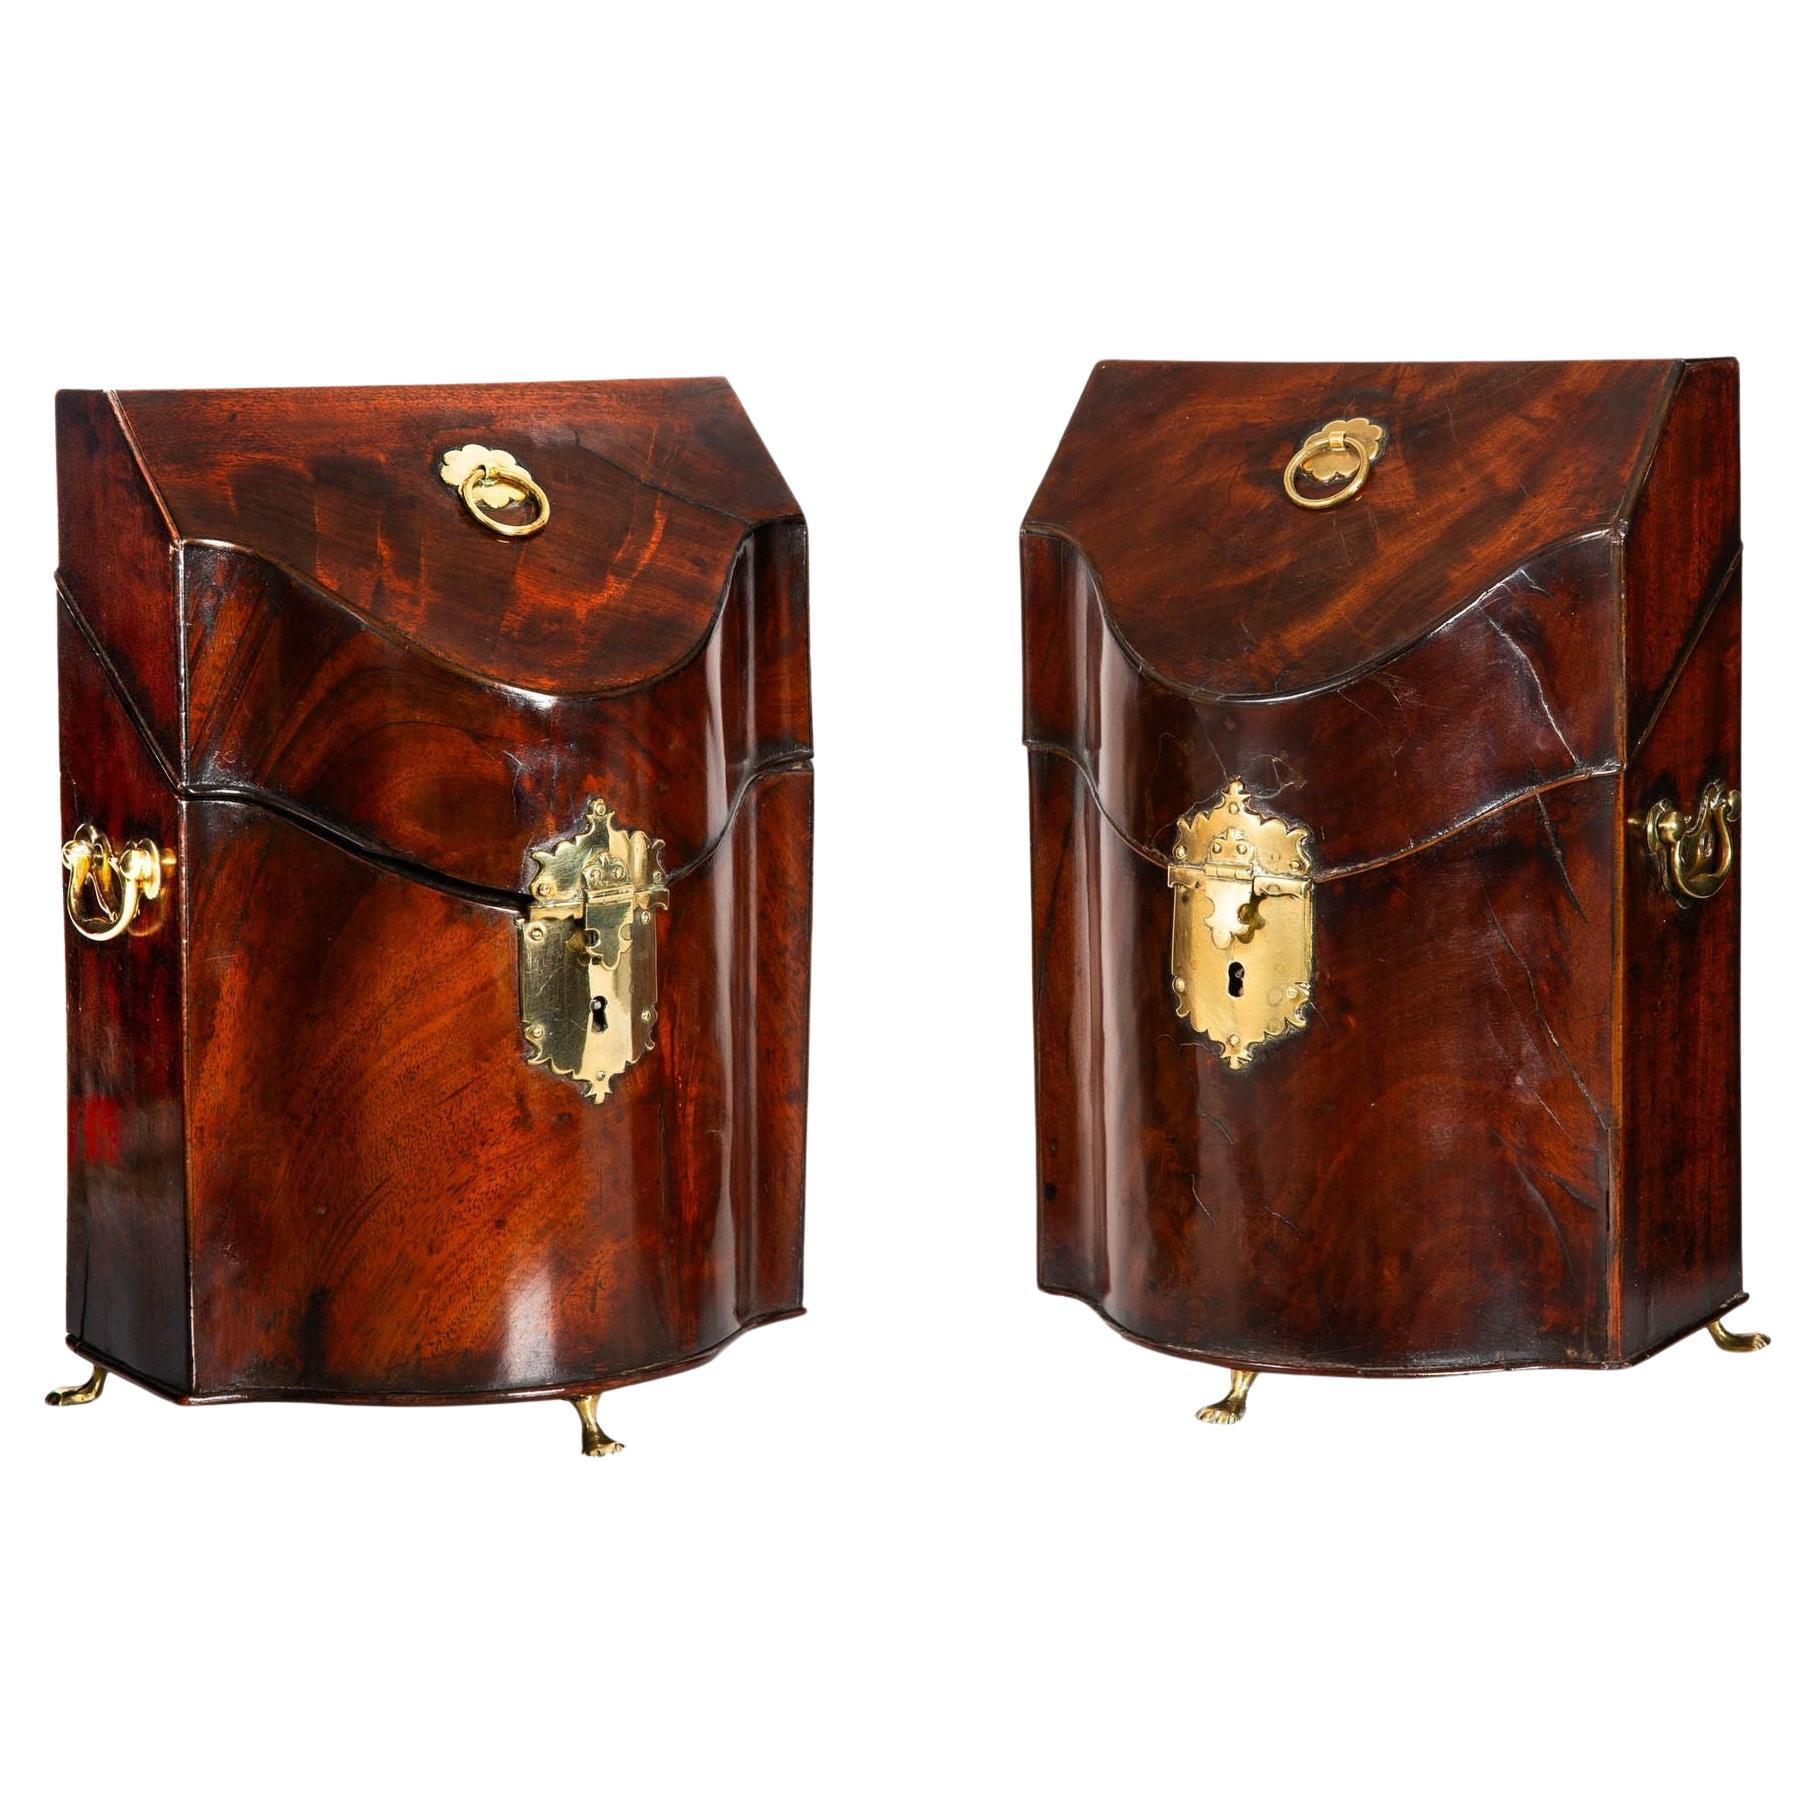 Fine Pair of English George III Period Antique Mahogany Boxes circa 1780 For Sale